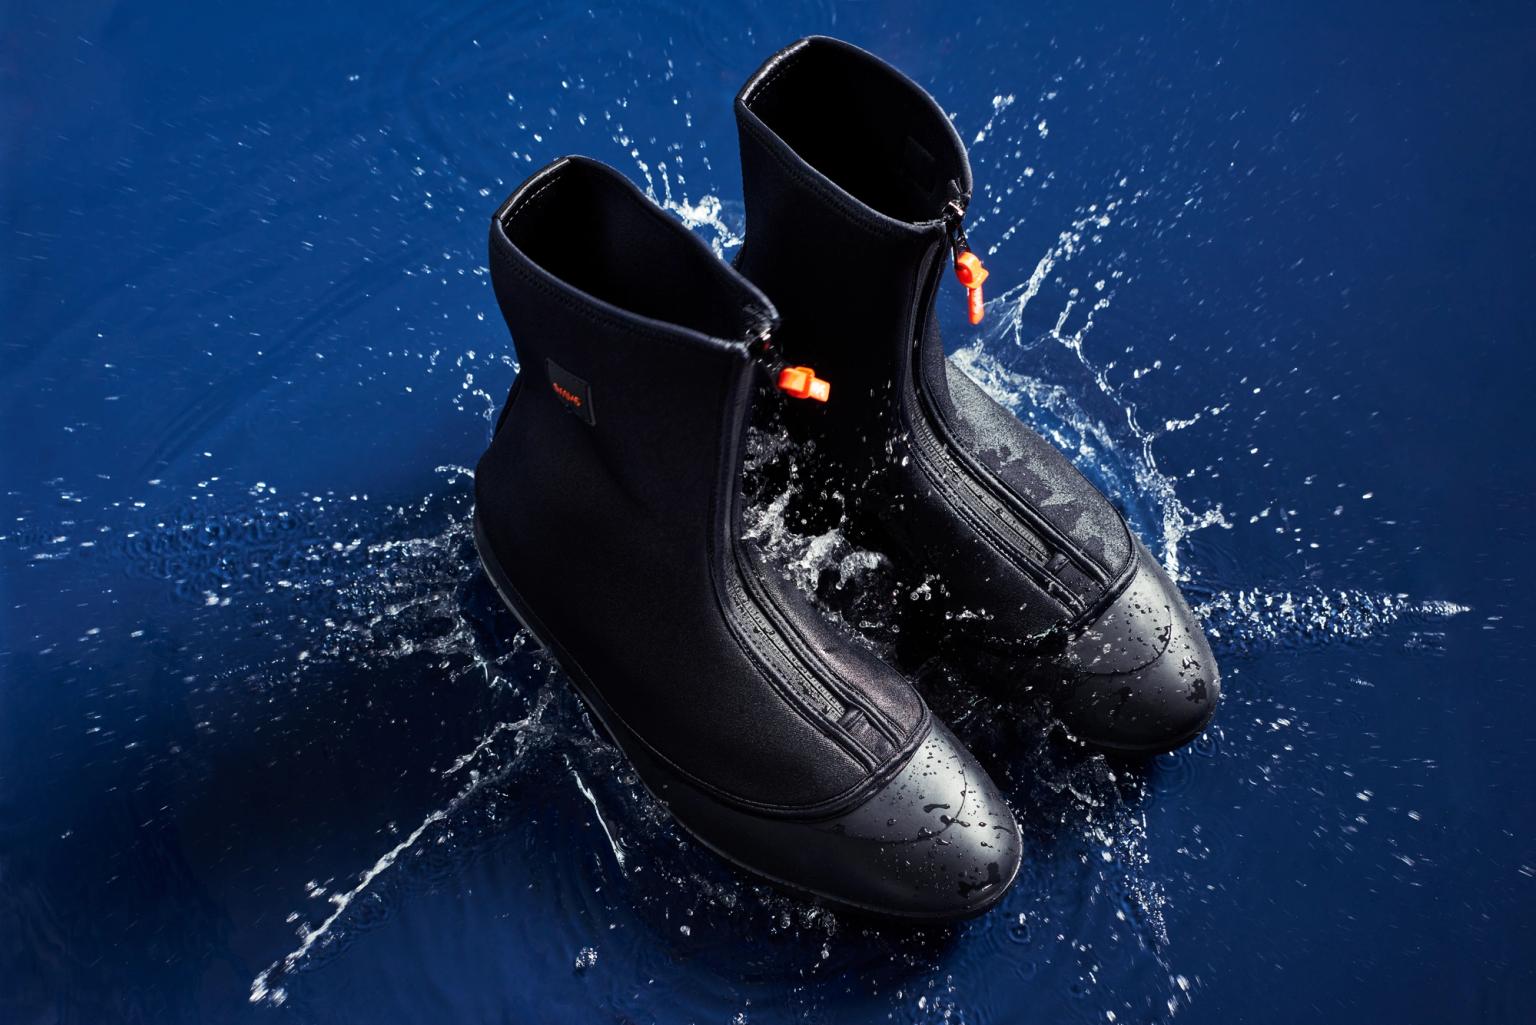 The boots from Swims are designed to resist water and bad weather_Business-Norway_Design_Lifestyle_Sustainable_functional